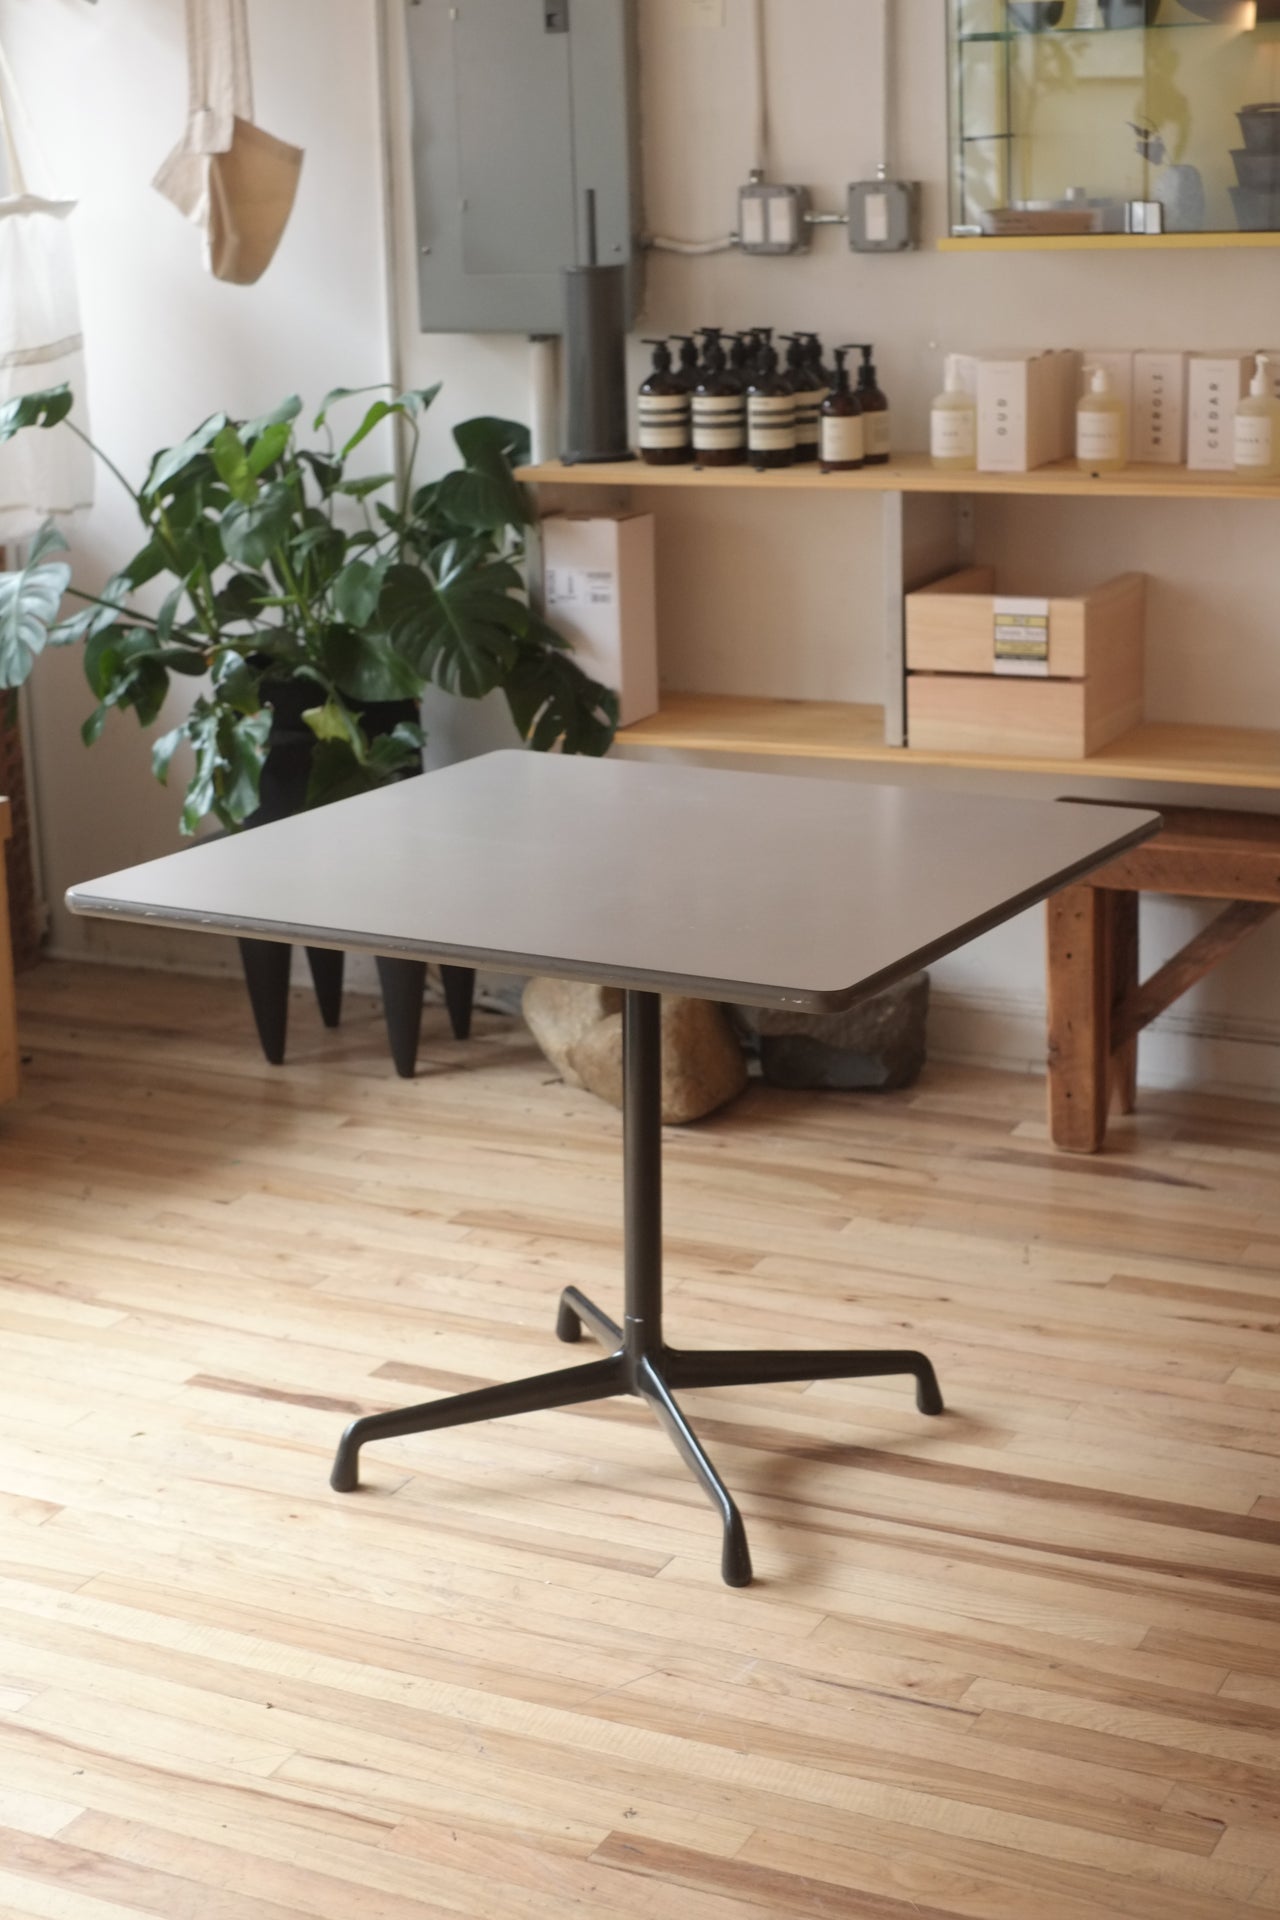 Eames Aluminum group 36" Square table by Herman Miller